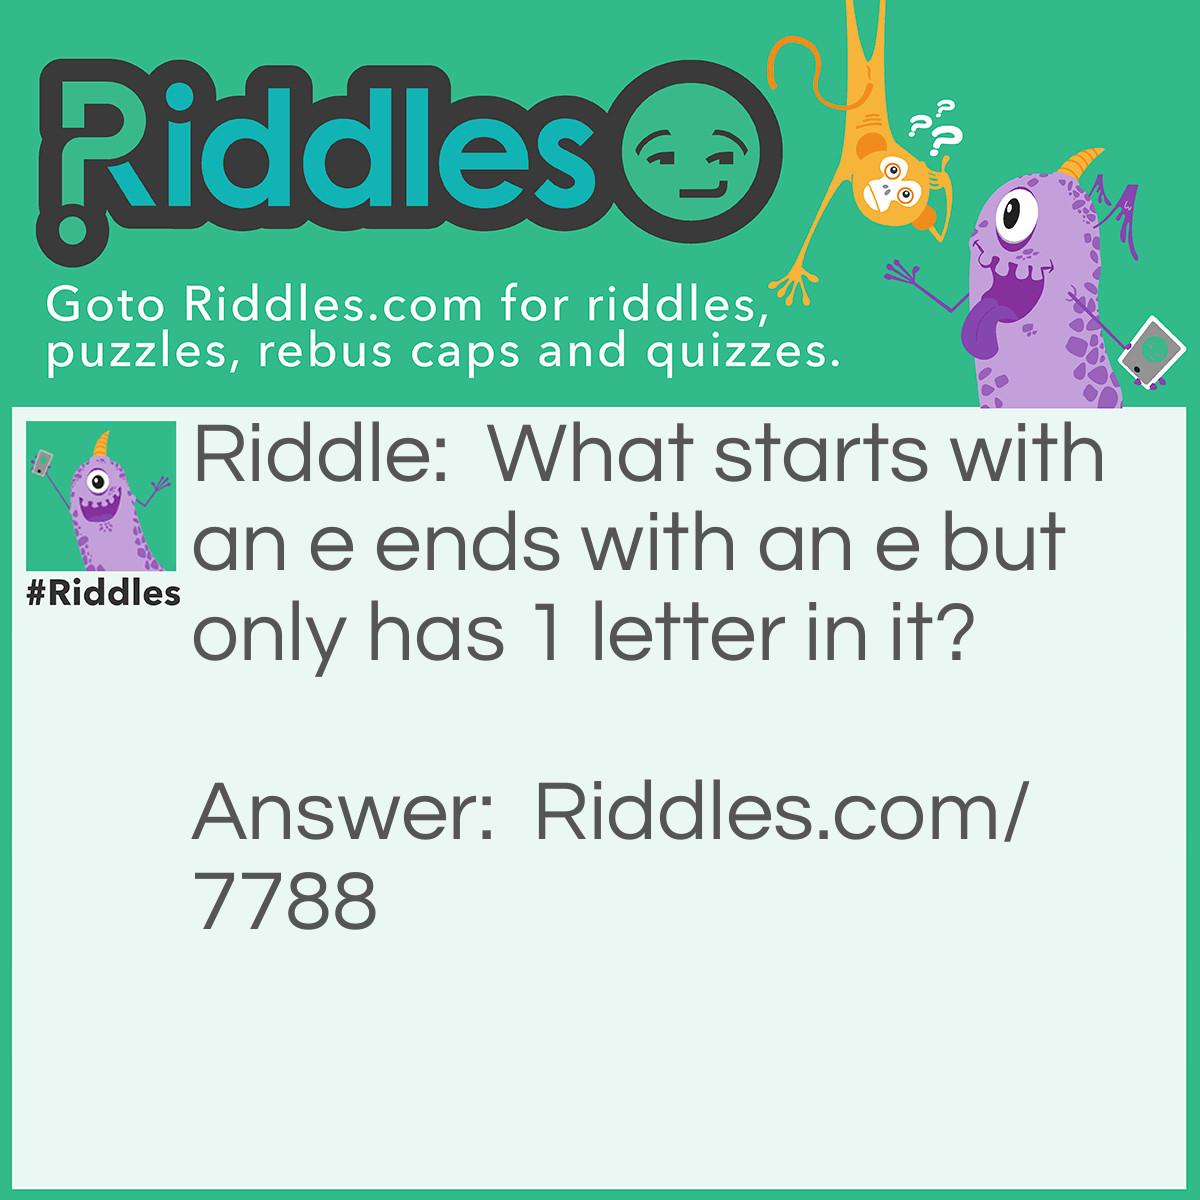 Riddle: What starts with an e ends with an e but only has 1 letter in it? Answer: Envelope 1 letter IN it